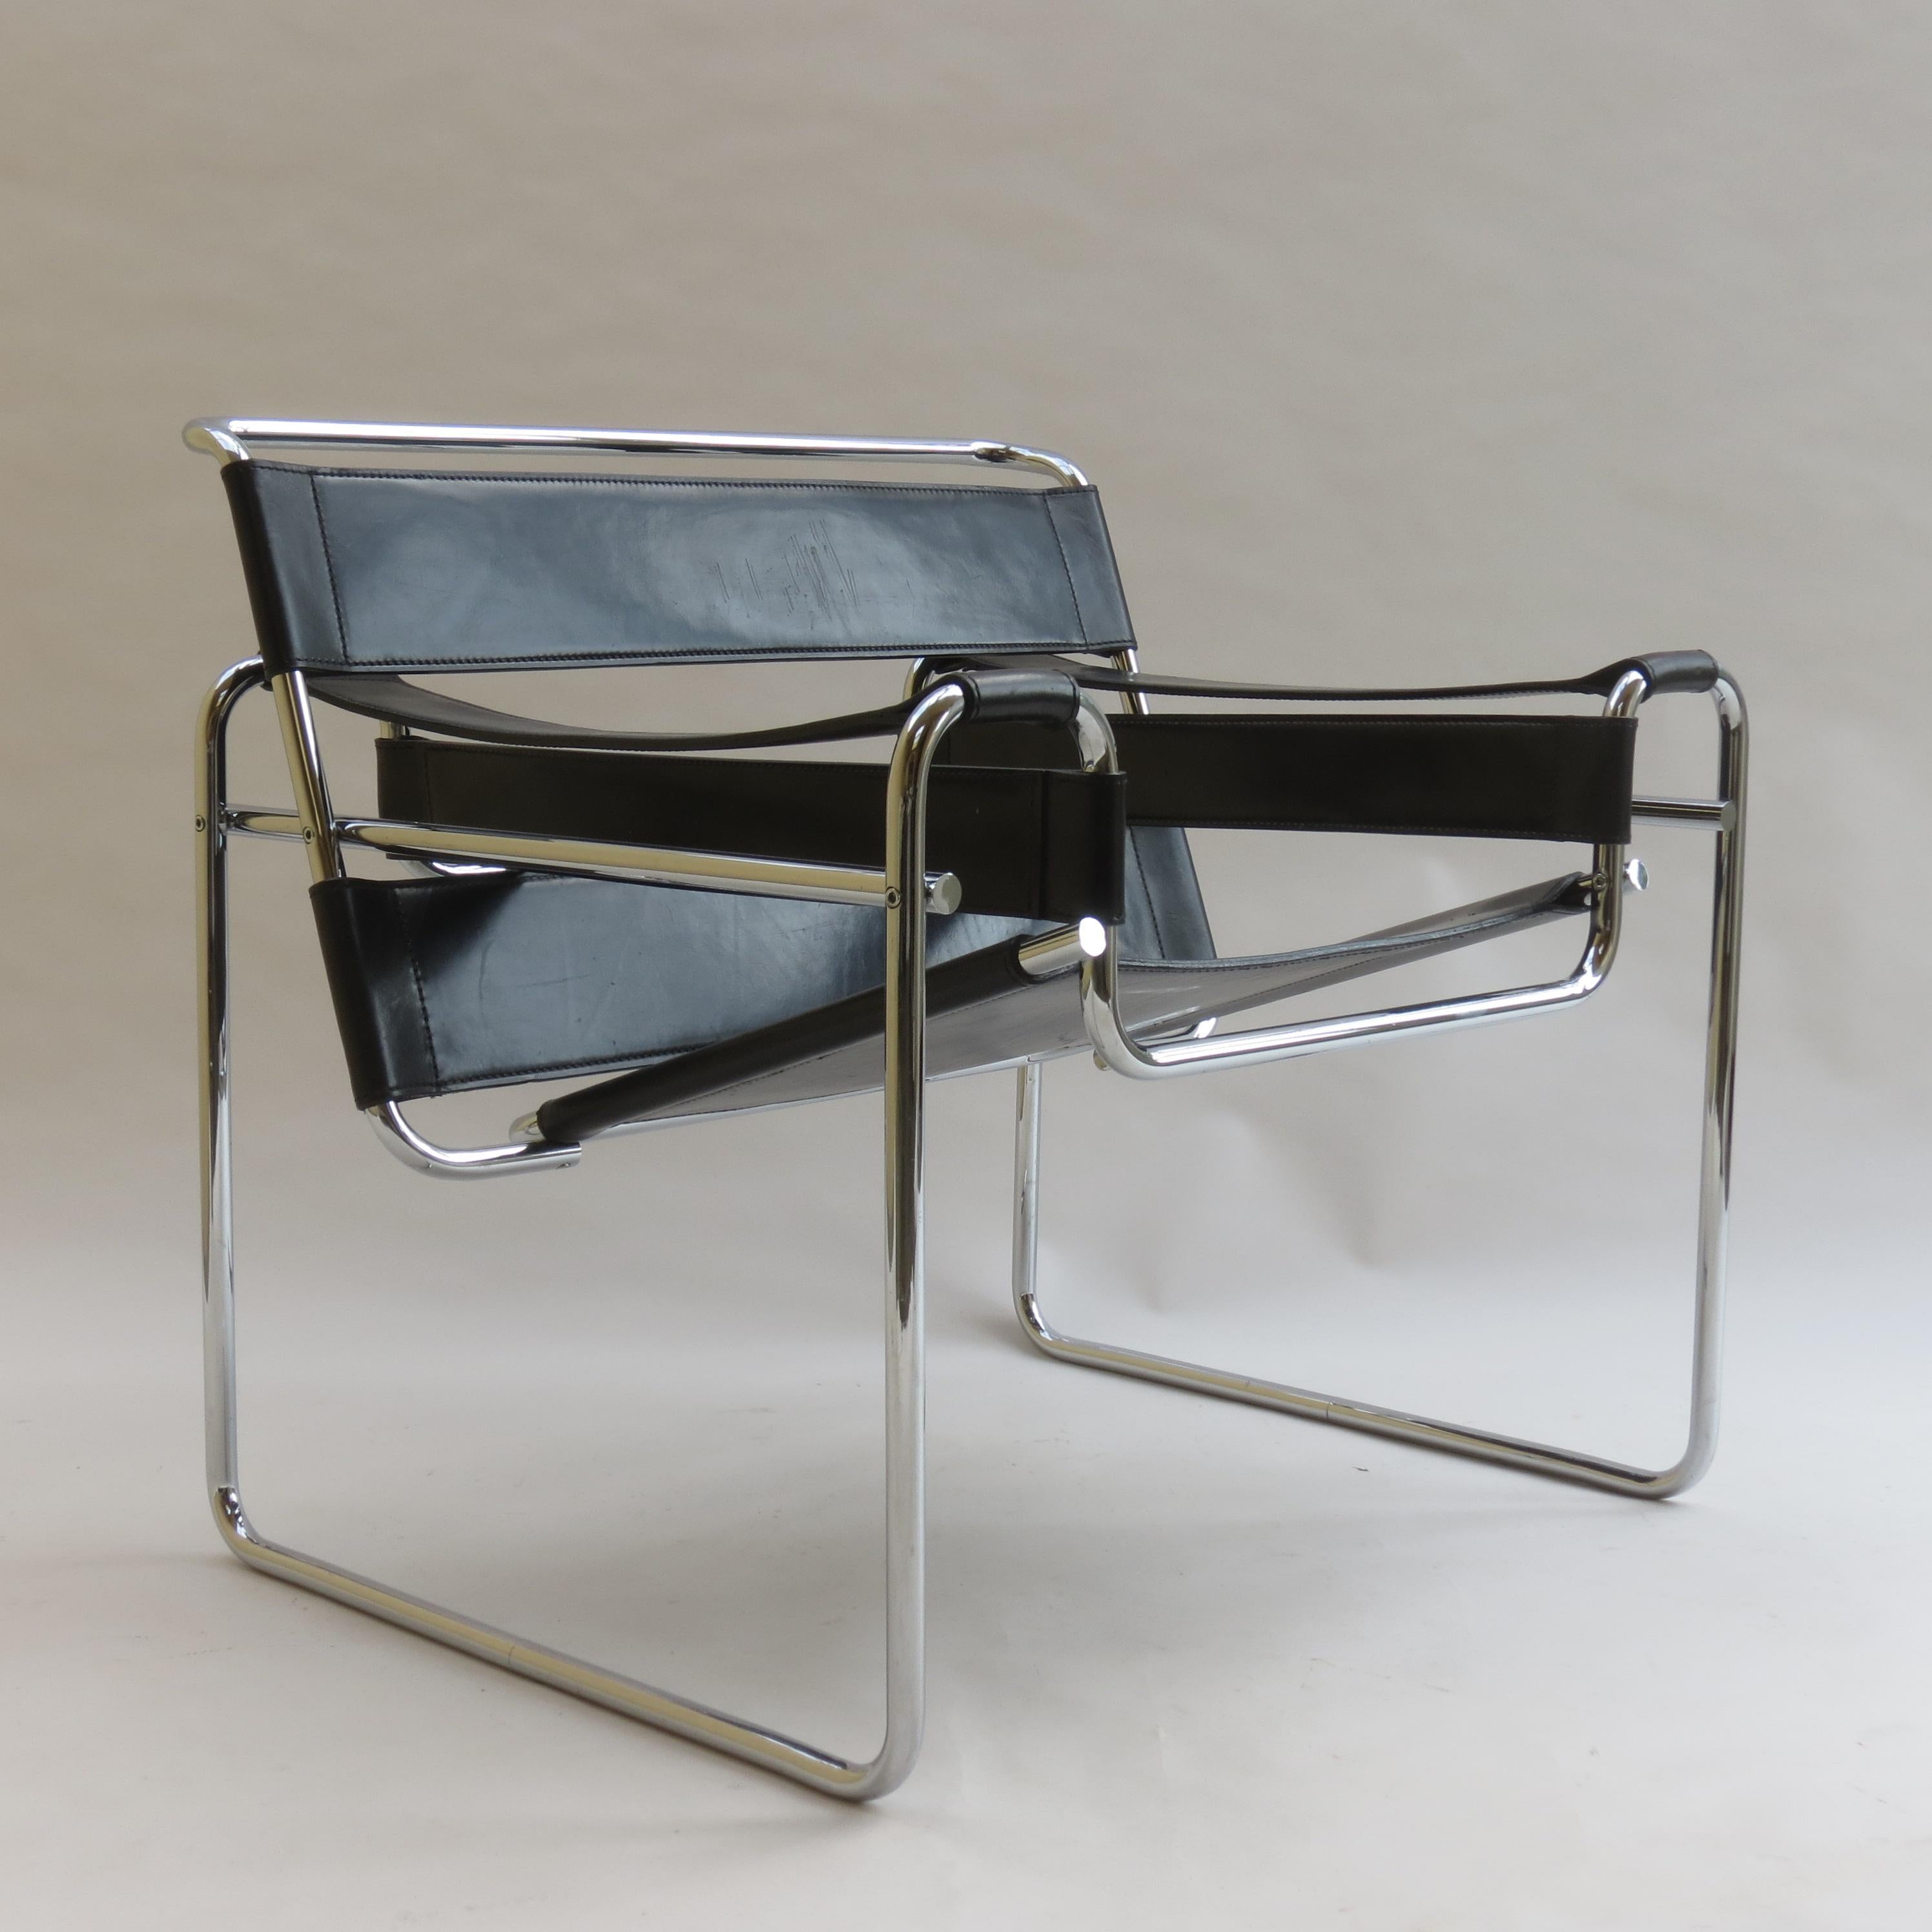 1980s Wassily B3 Leather and Chrome Chair Marcel Breuer for Knoll 1